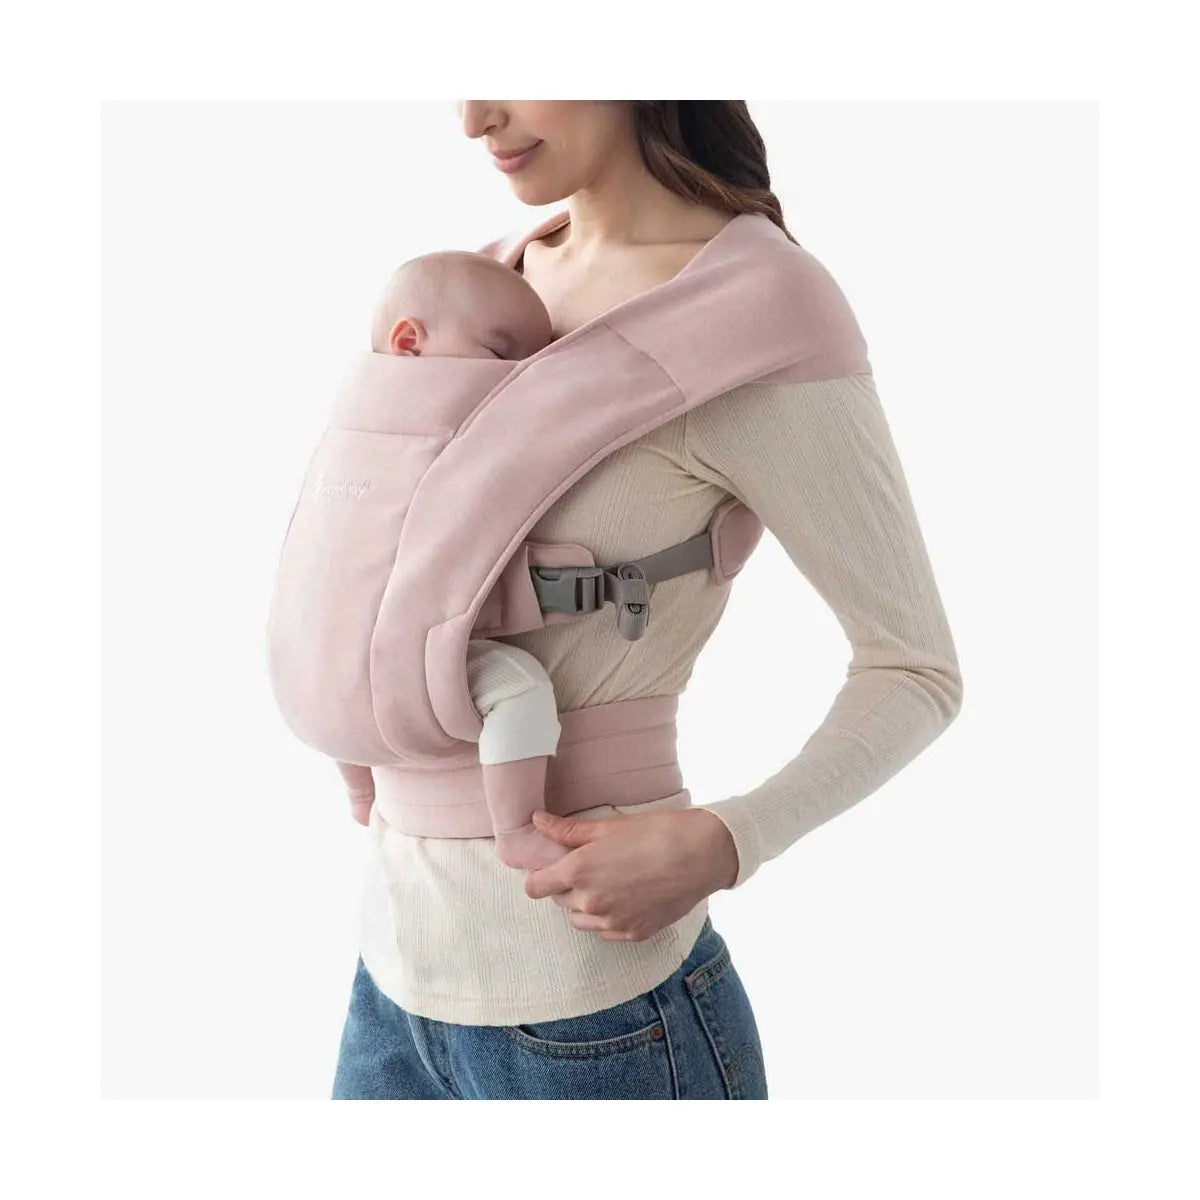 Ergobaby Carrier Embrace - Blush Pink - For Your Little One